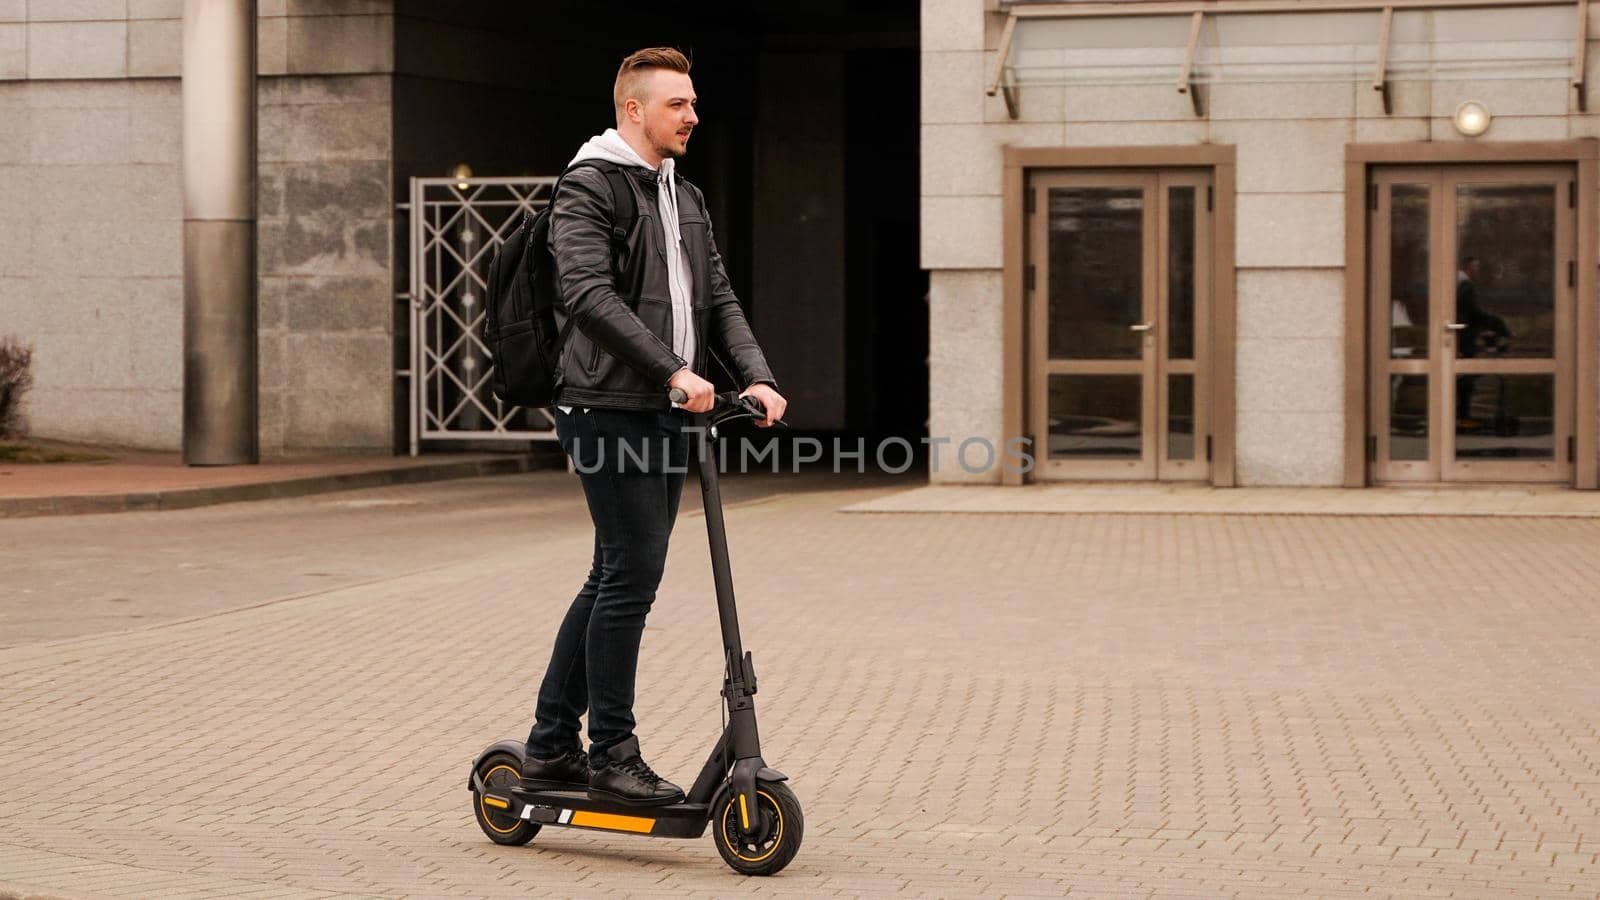 Tall man on an electric scooter against the backdrop of gray city buildings by natali_brill